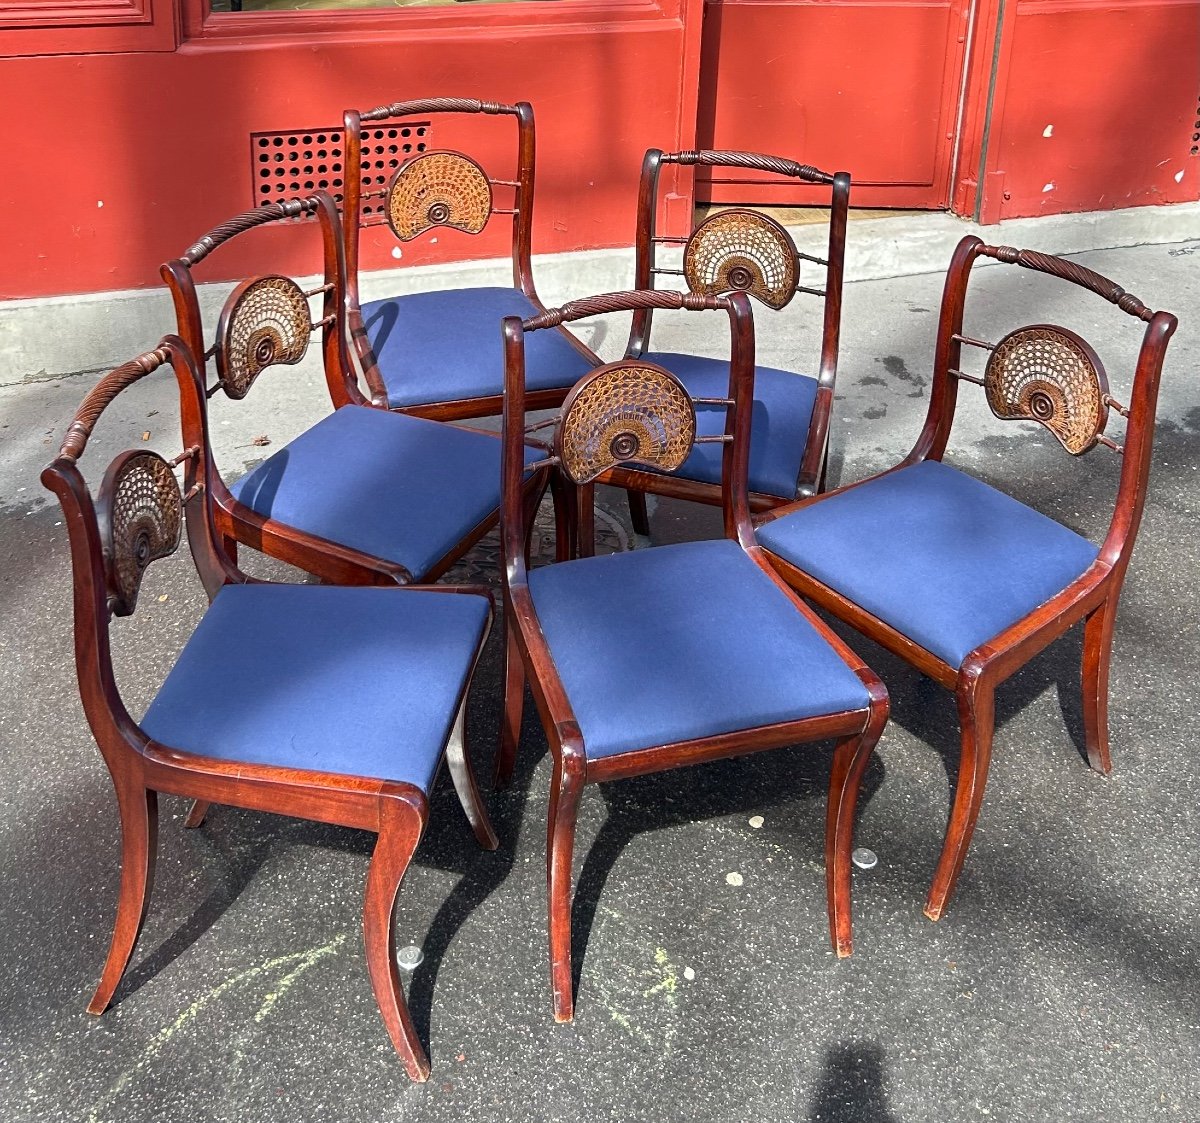  6 English Chairs In Solid Mahogany. Fan-shaped Openwork Backrest  England 20ème 